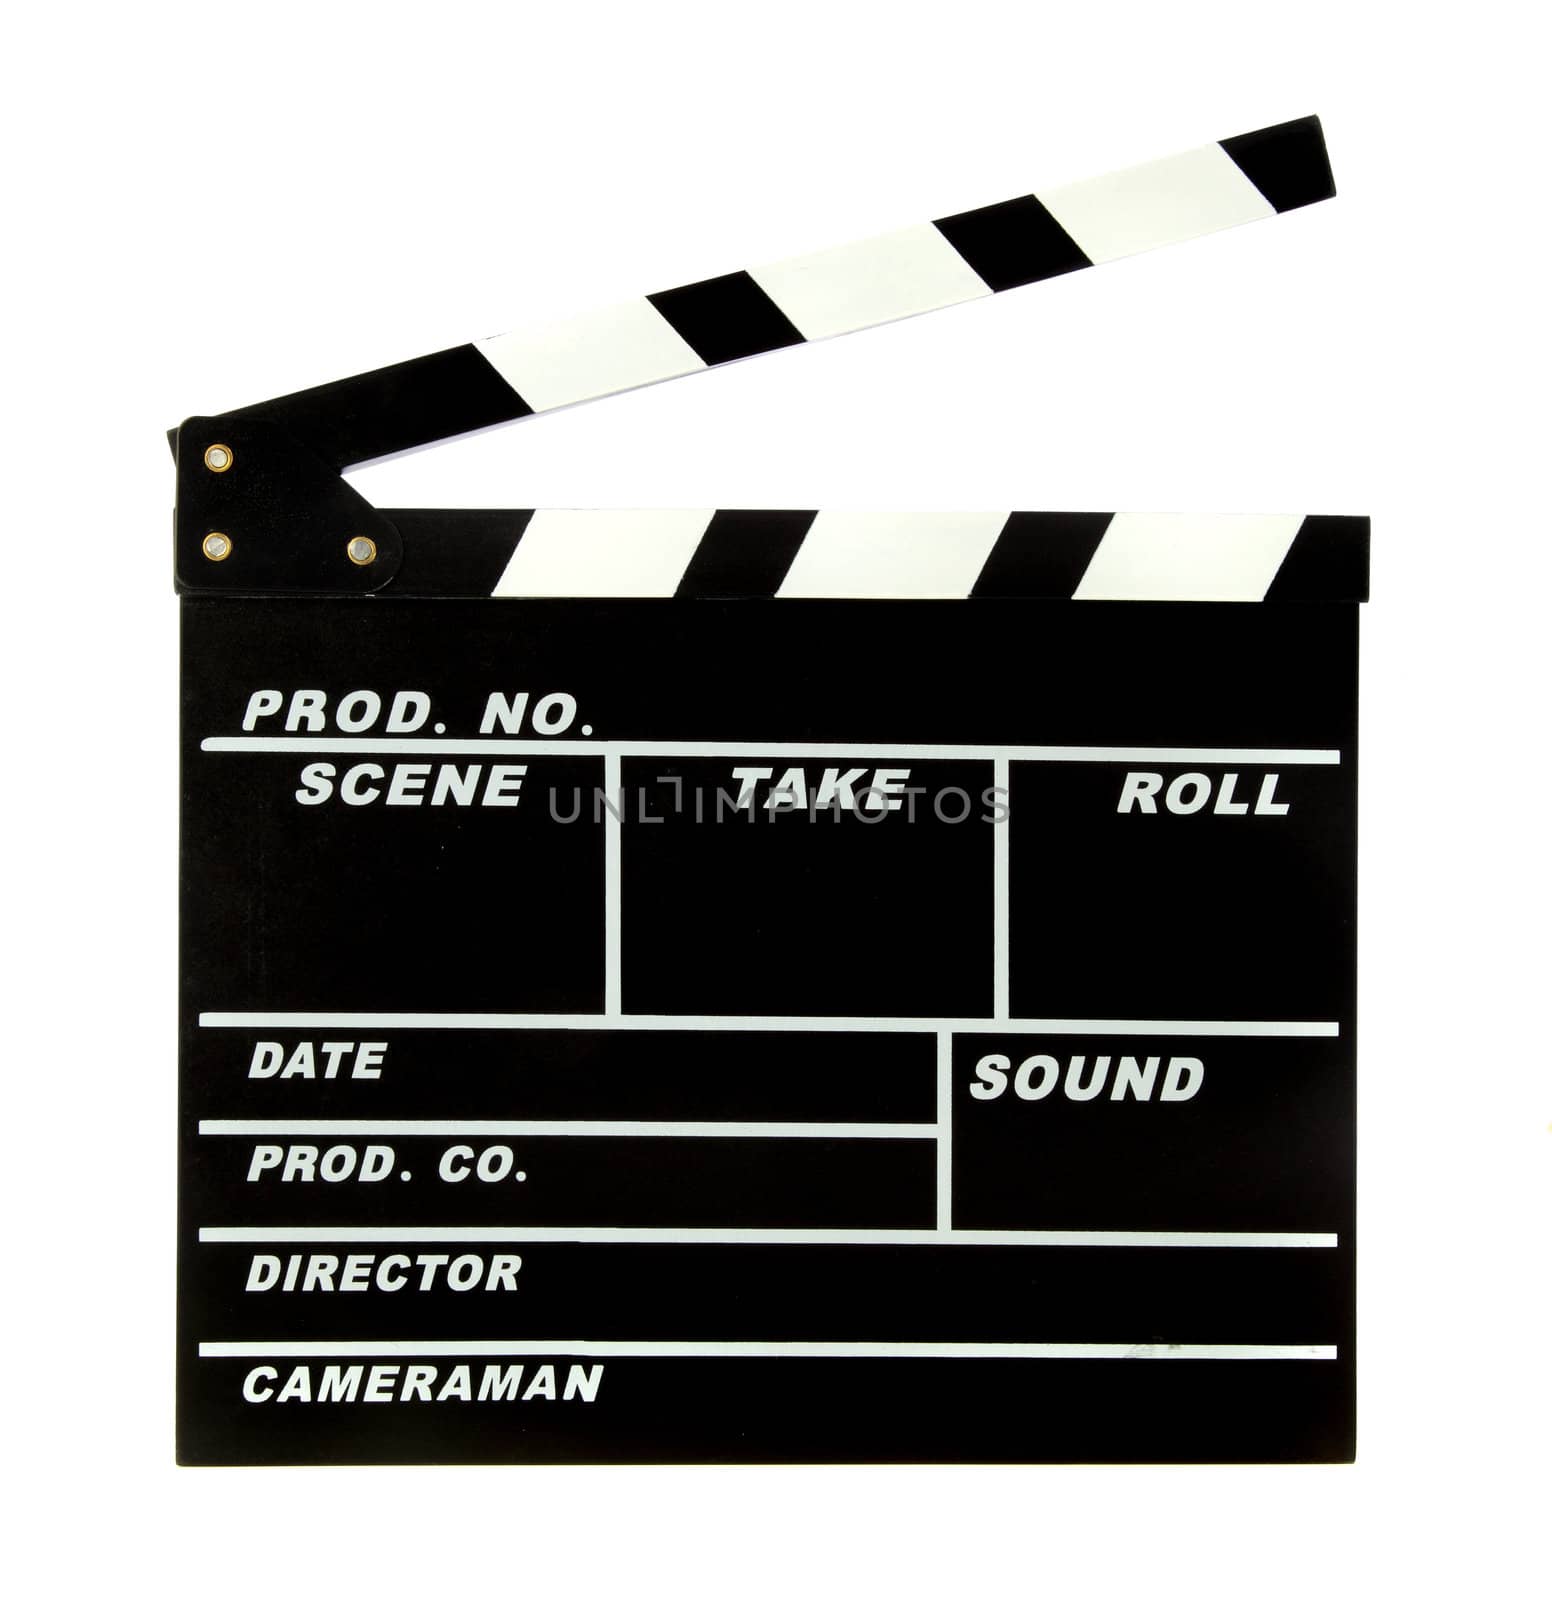 A standard clapperboard. All isolated on white background.